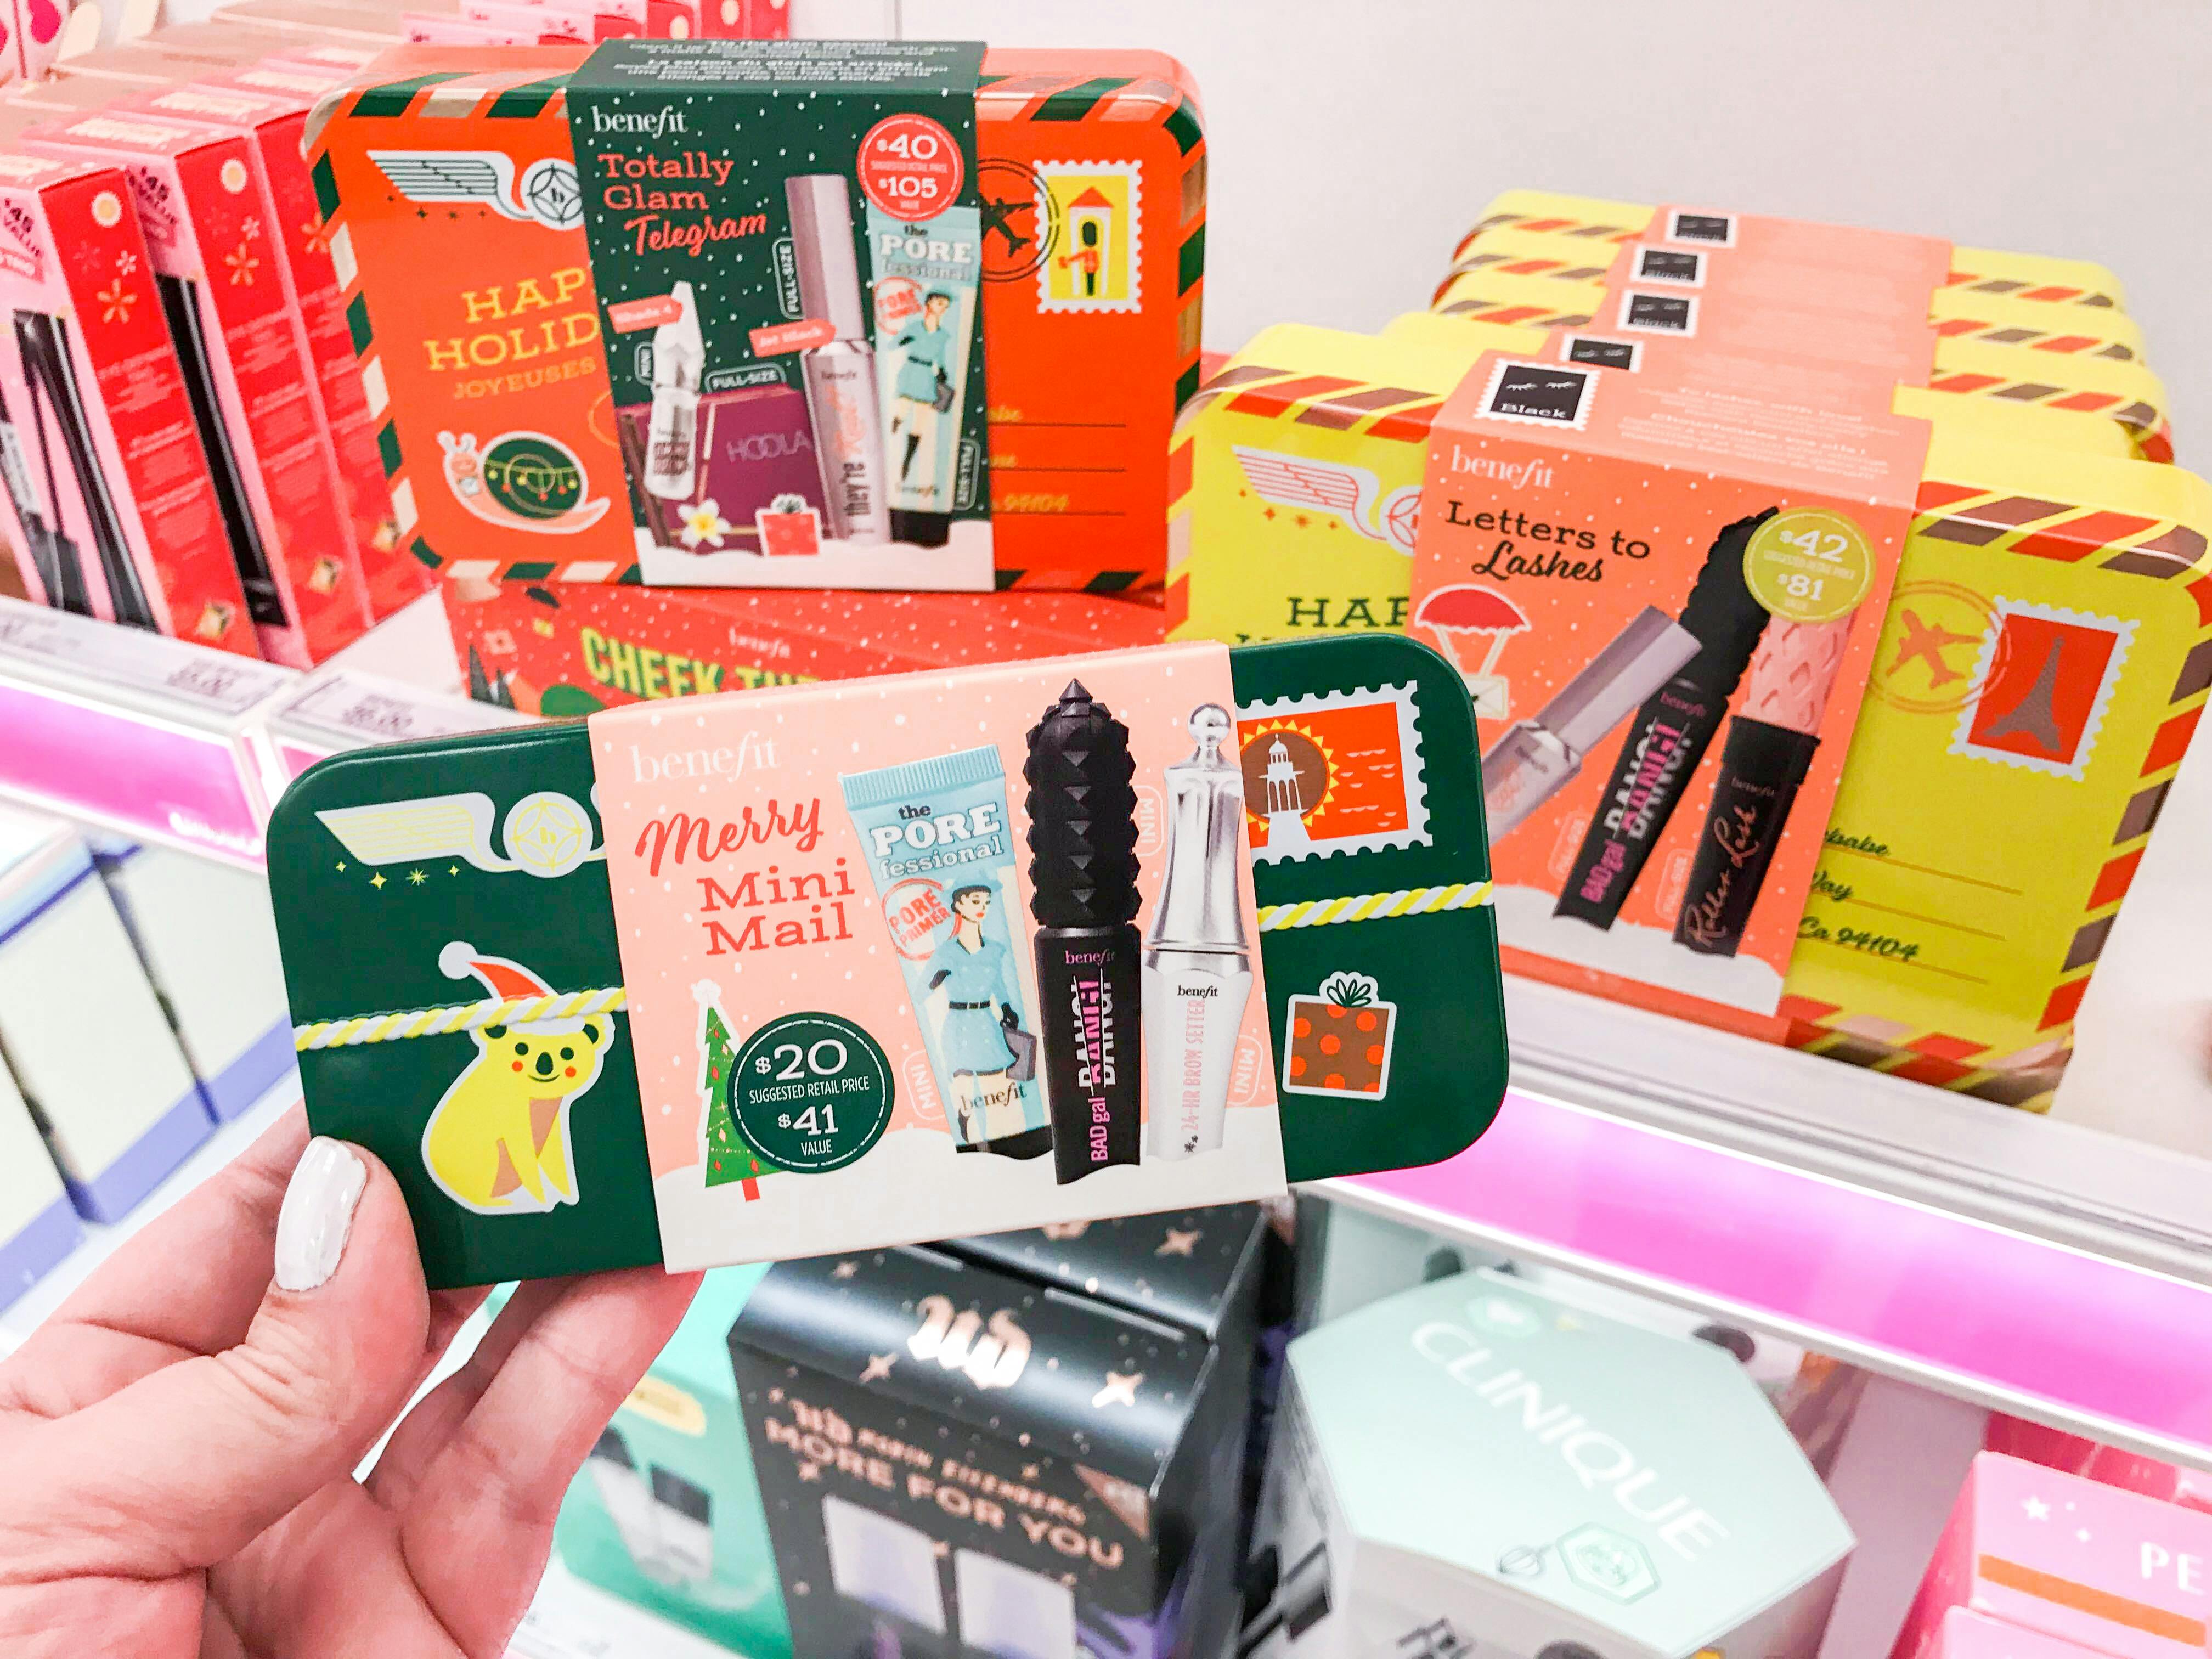 ulta-gift-sets-are-available-at-target-ahead-of-2022-holidays-the